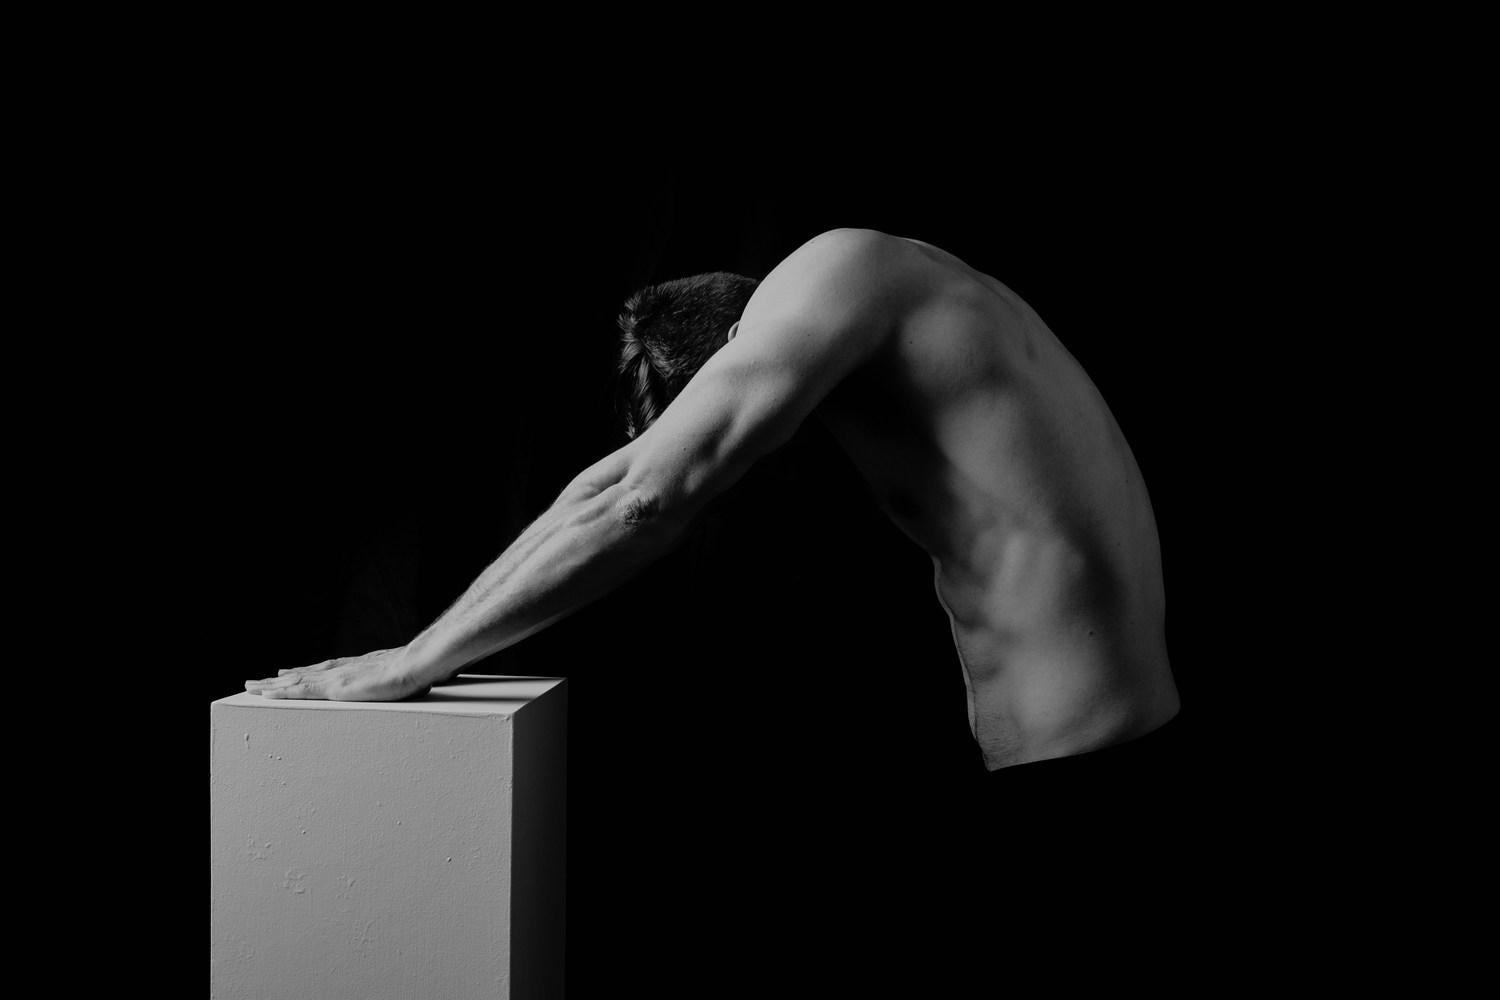 David Pugh Portrait Photograph - “Untitled” (from Body Series)